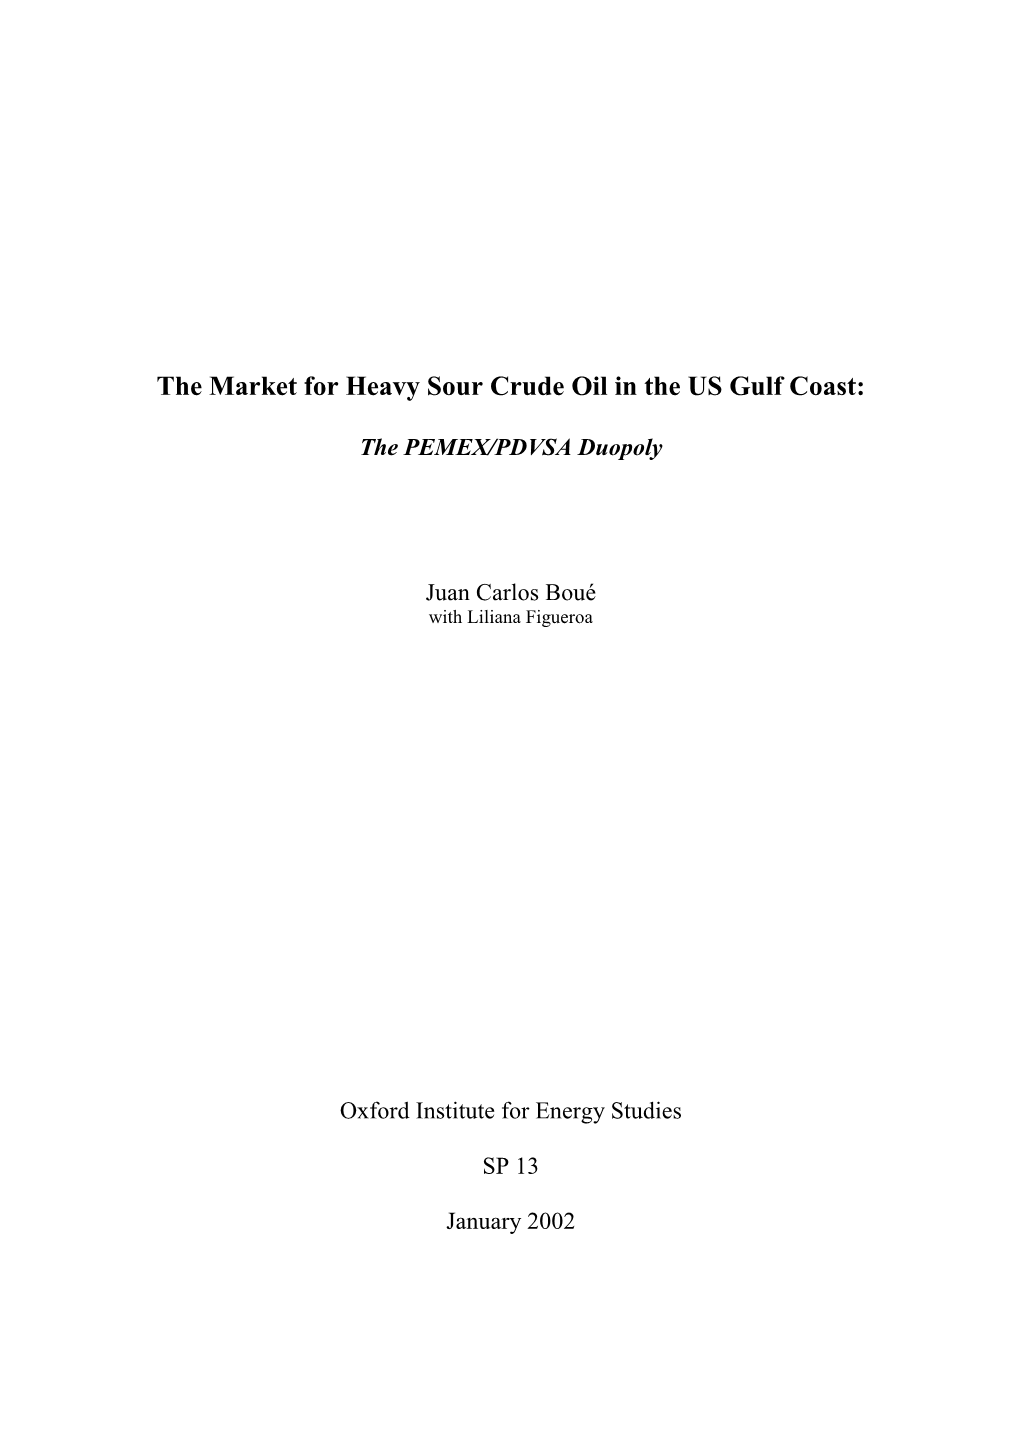 The Market for Heavy Sour Crude Oil in the US Gulf Coast